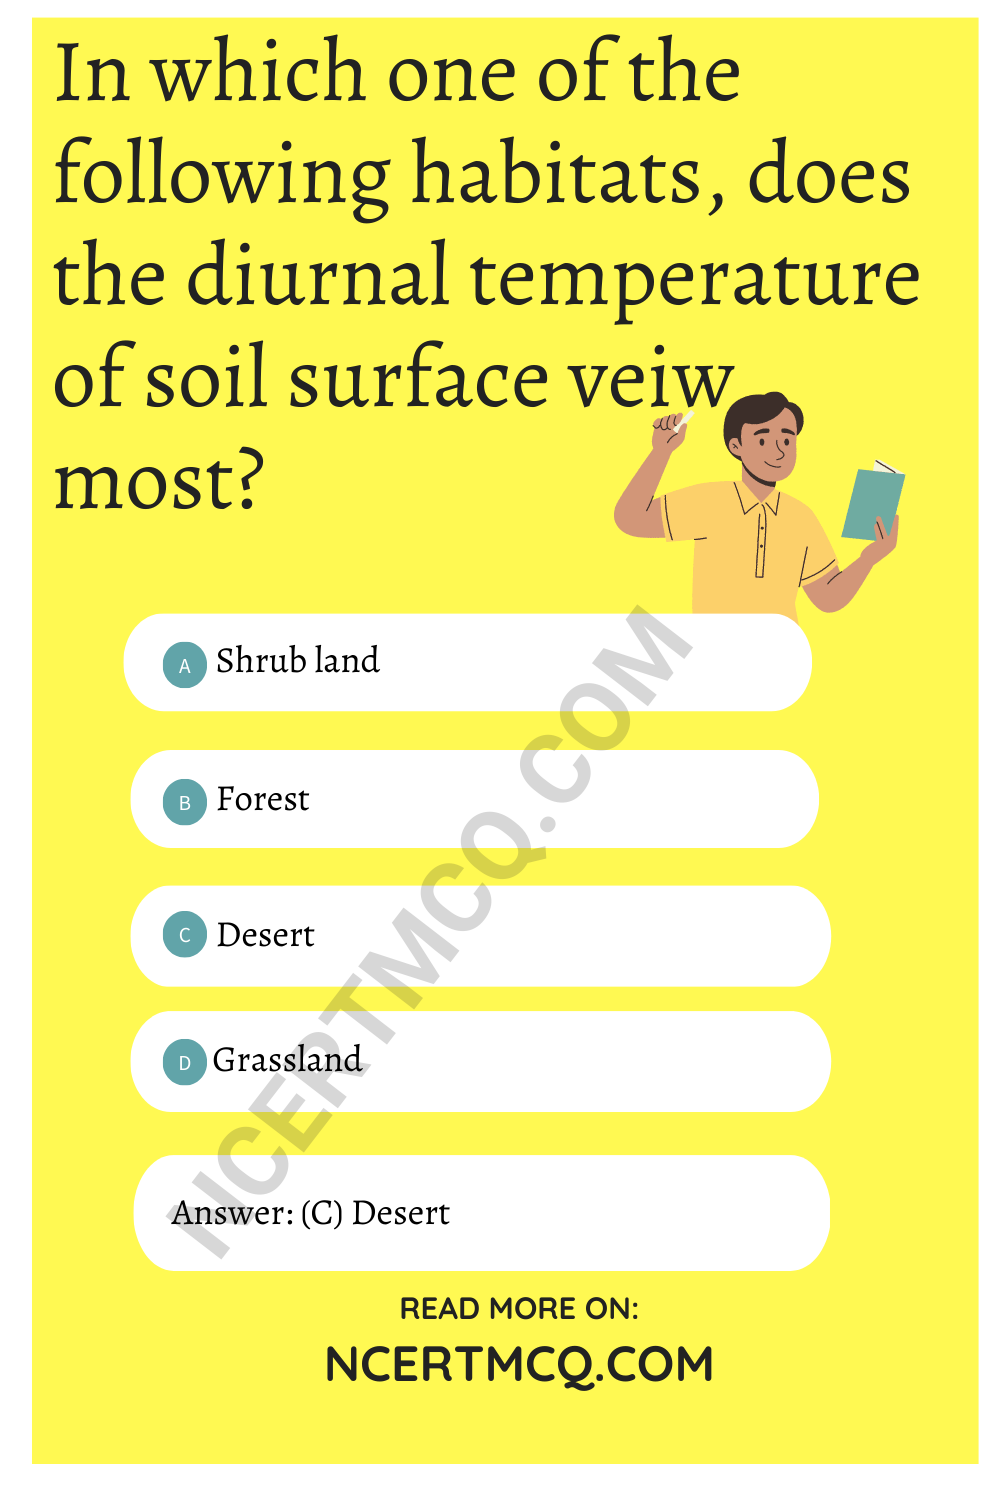 In which one of the following habitats, does the diurnal temperature of soil surface veiw most?